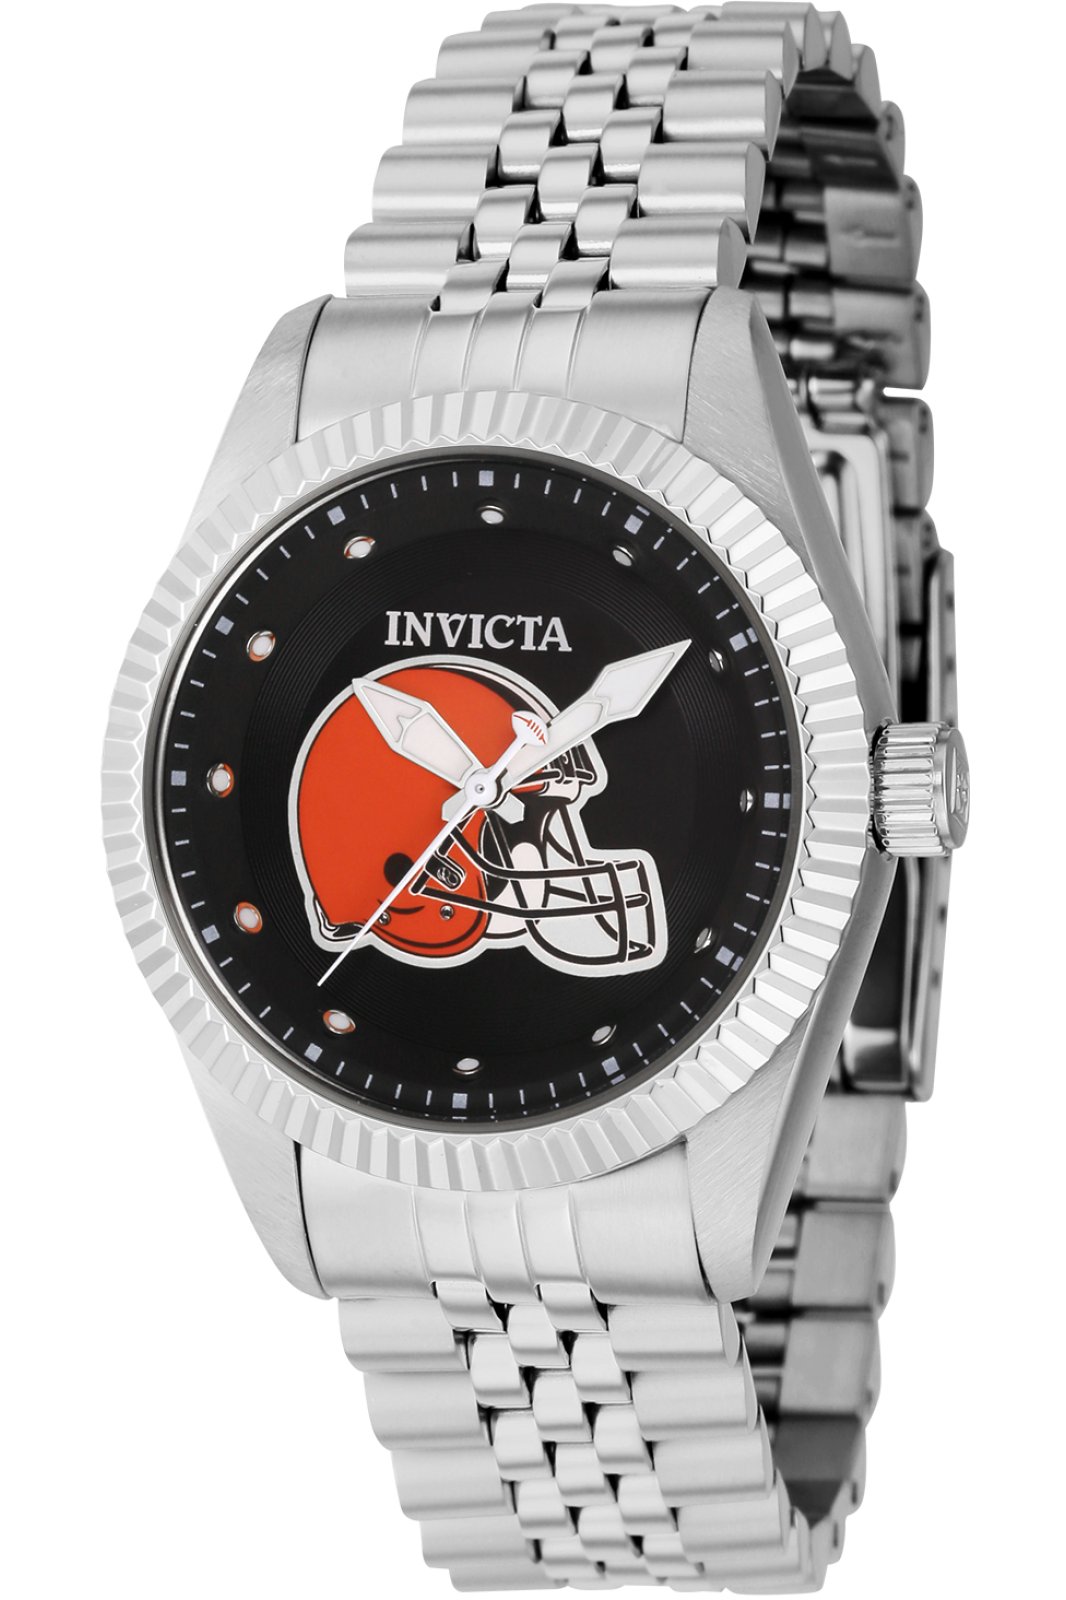 Invicta Watch NFL - Cleveland Browns 42492 - Official Invicta Store